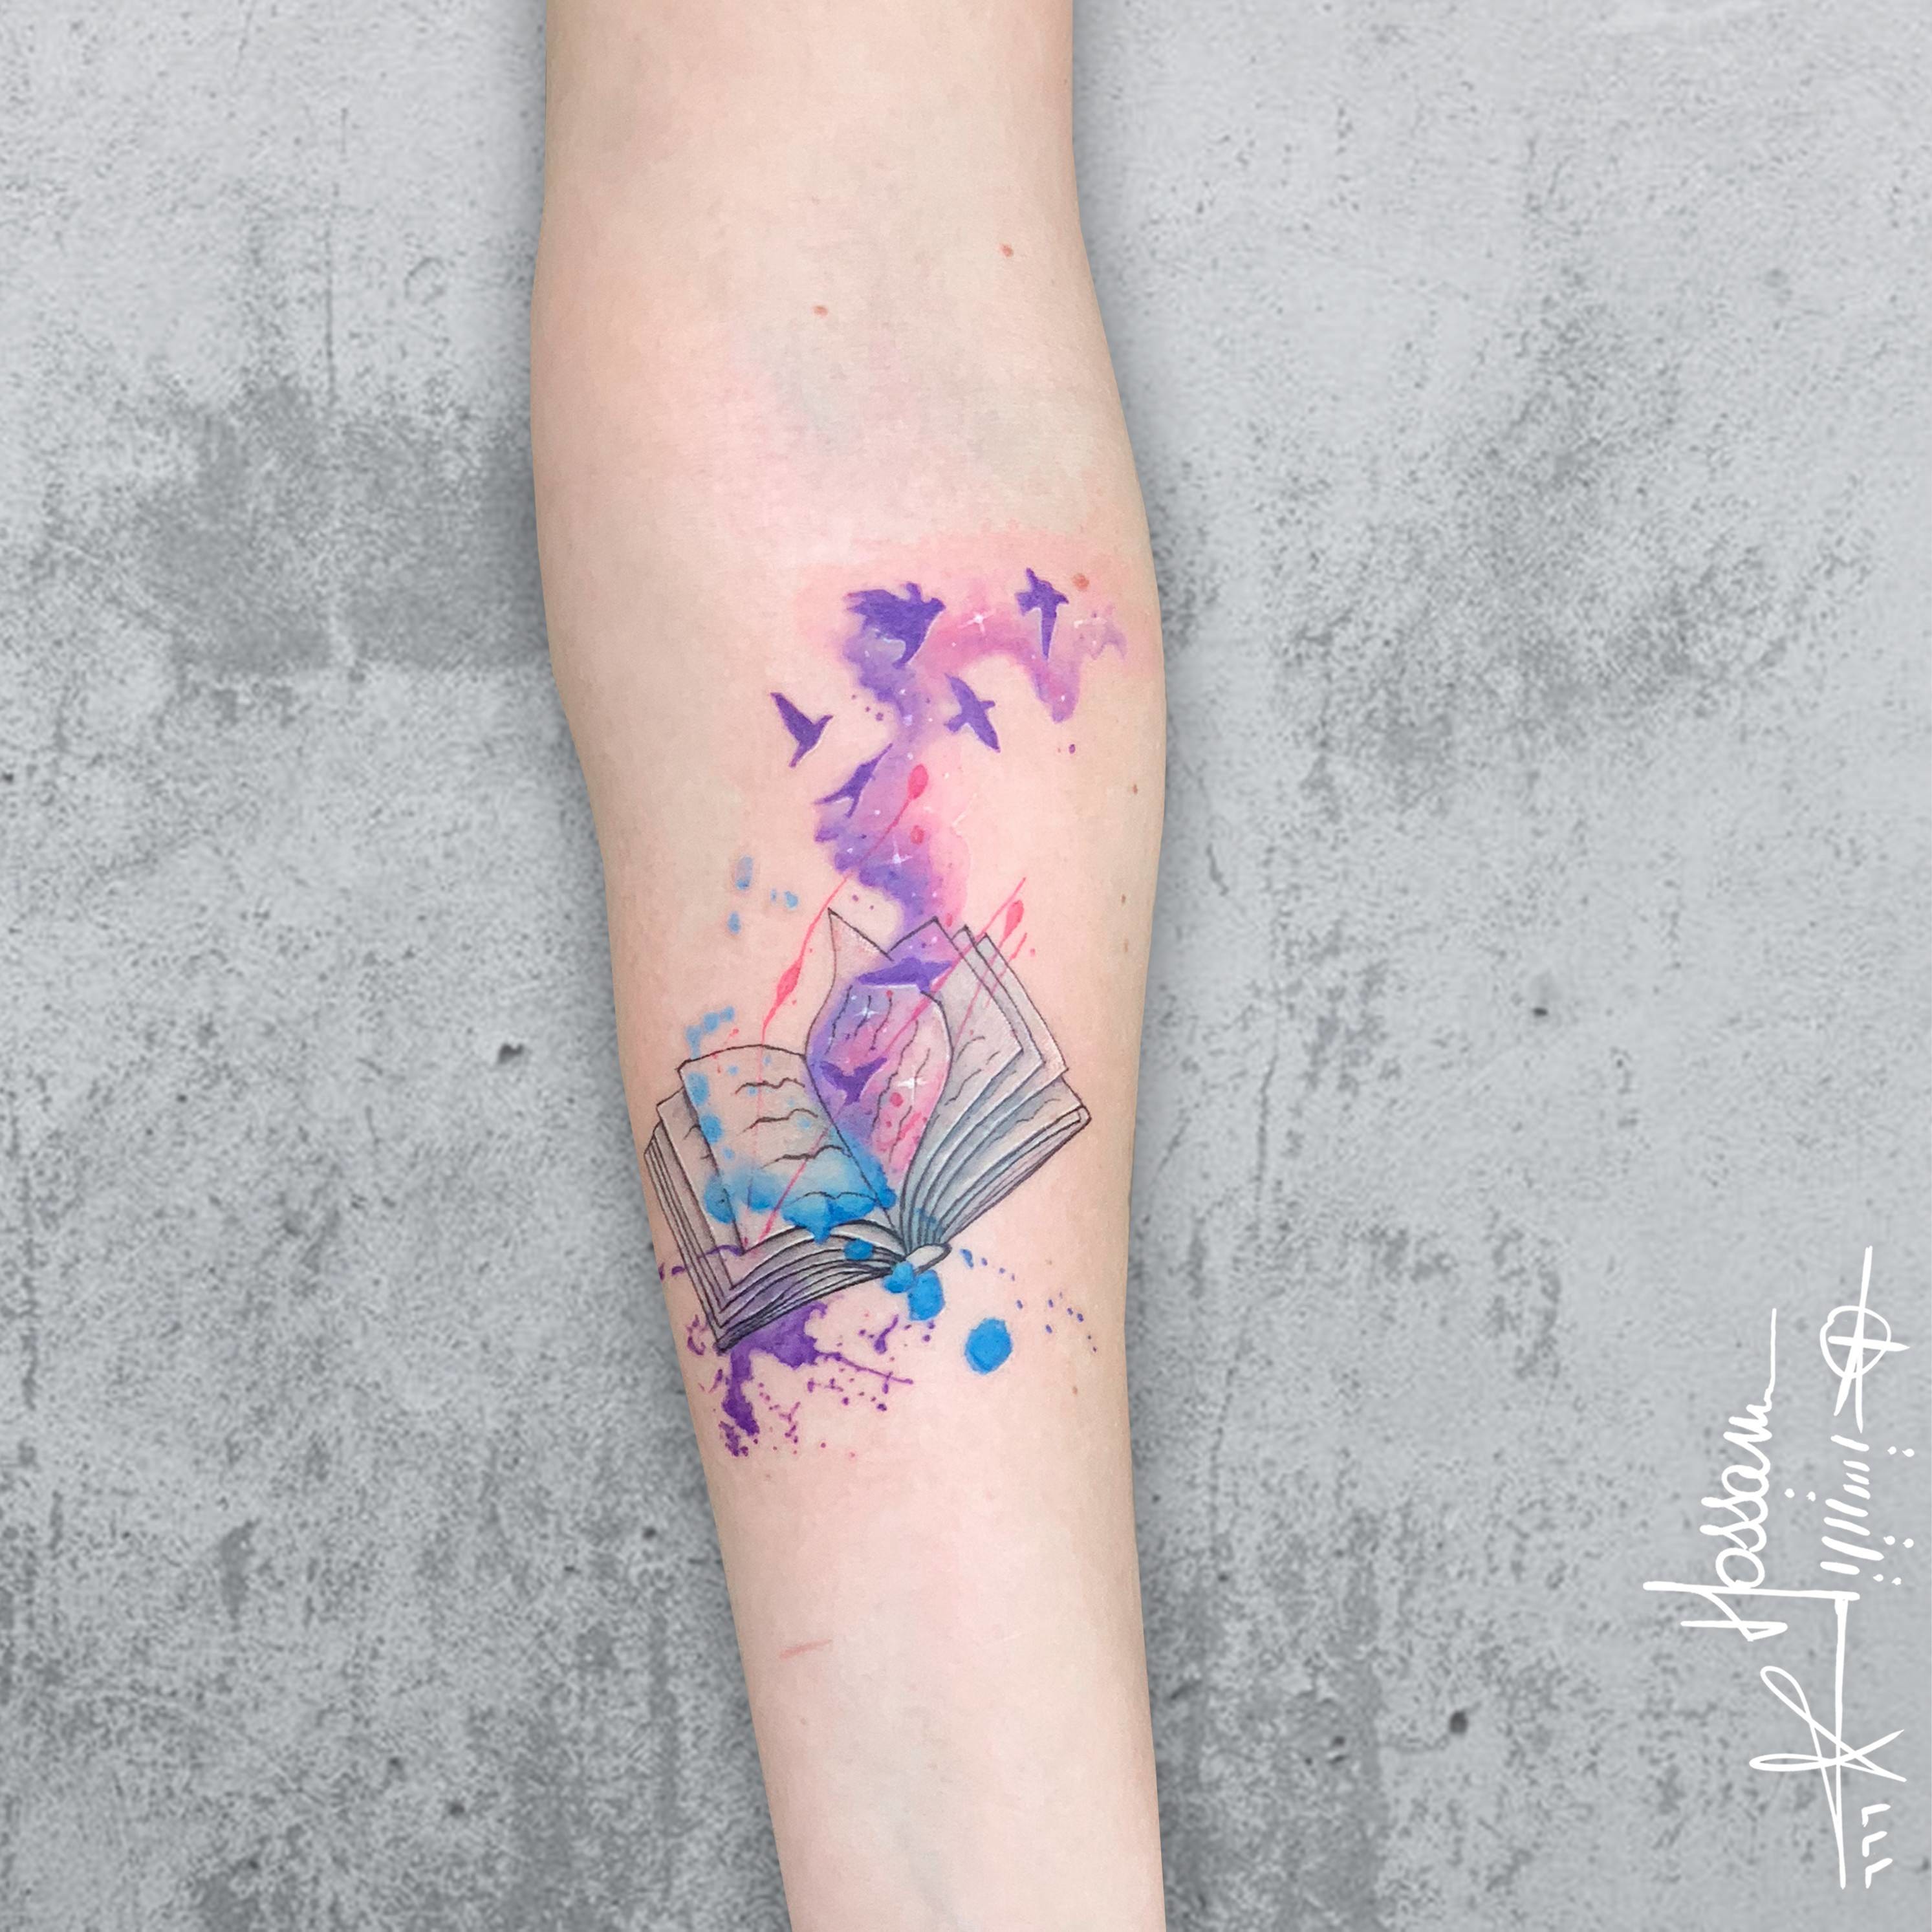 TatMasters - Read everything about Contemporary tattoos